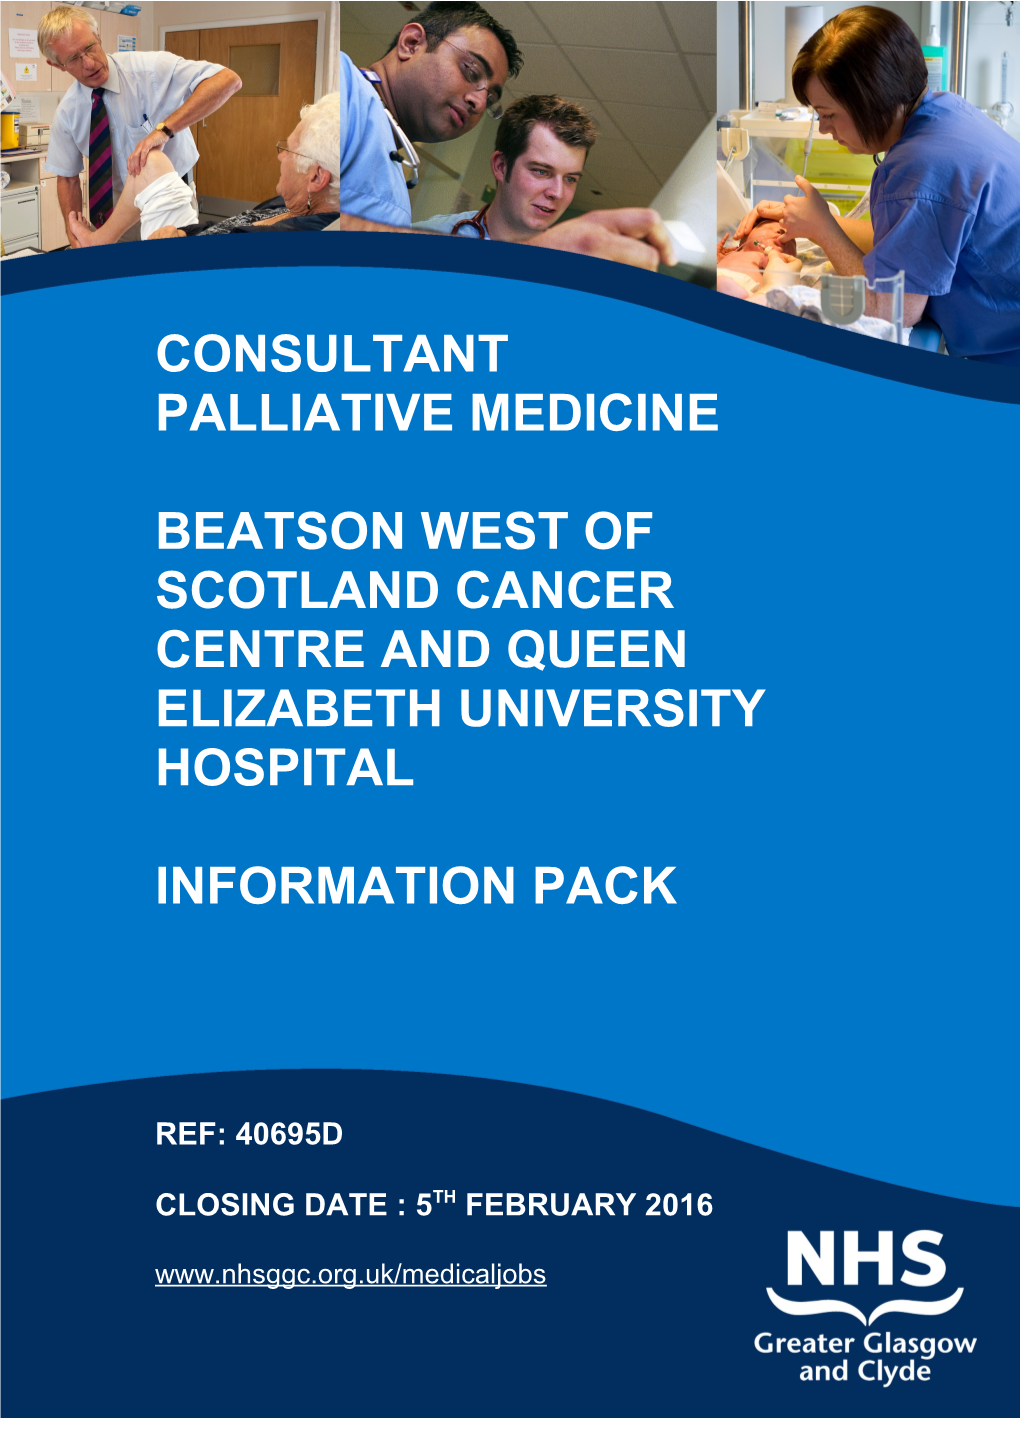 BEATSON WEST of SCOTLAND CANCER CENTRE and Queen ELIZABETH UNIVERSITY HOSPITAL